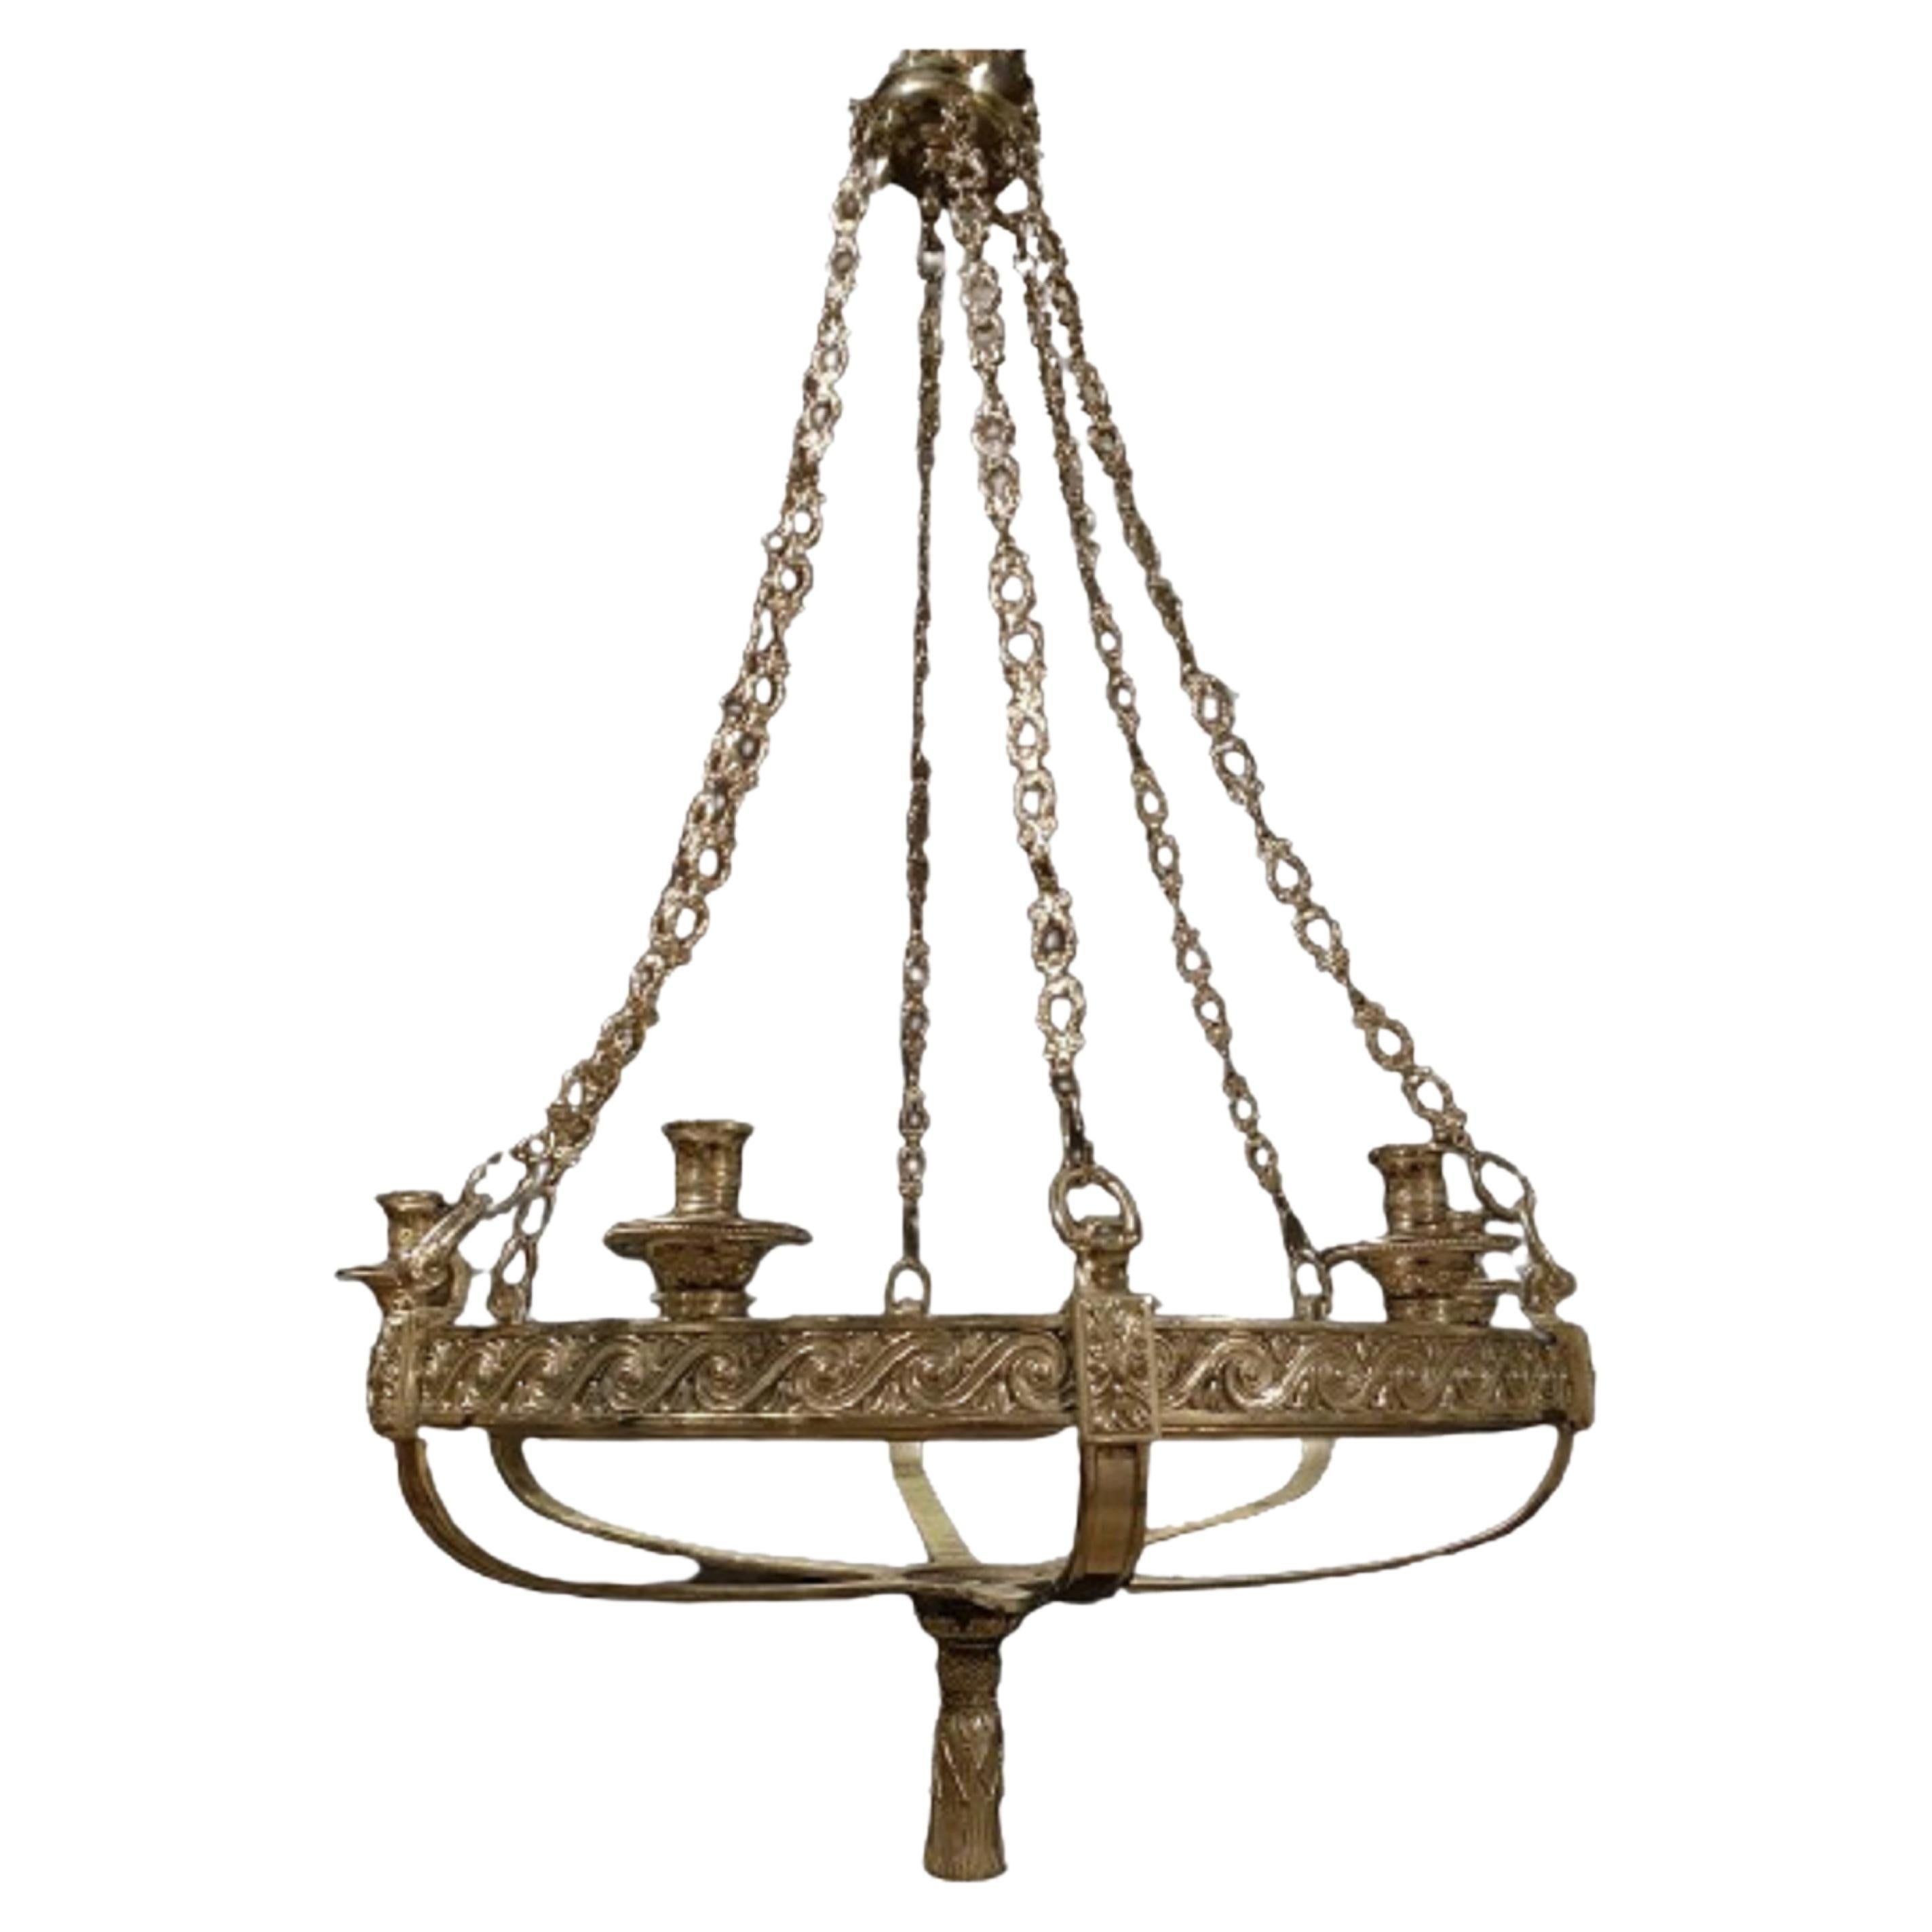 1900’s Caldwell Neoclassical Silver Plated Chandelier